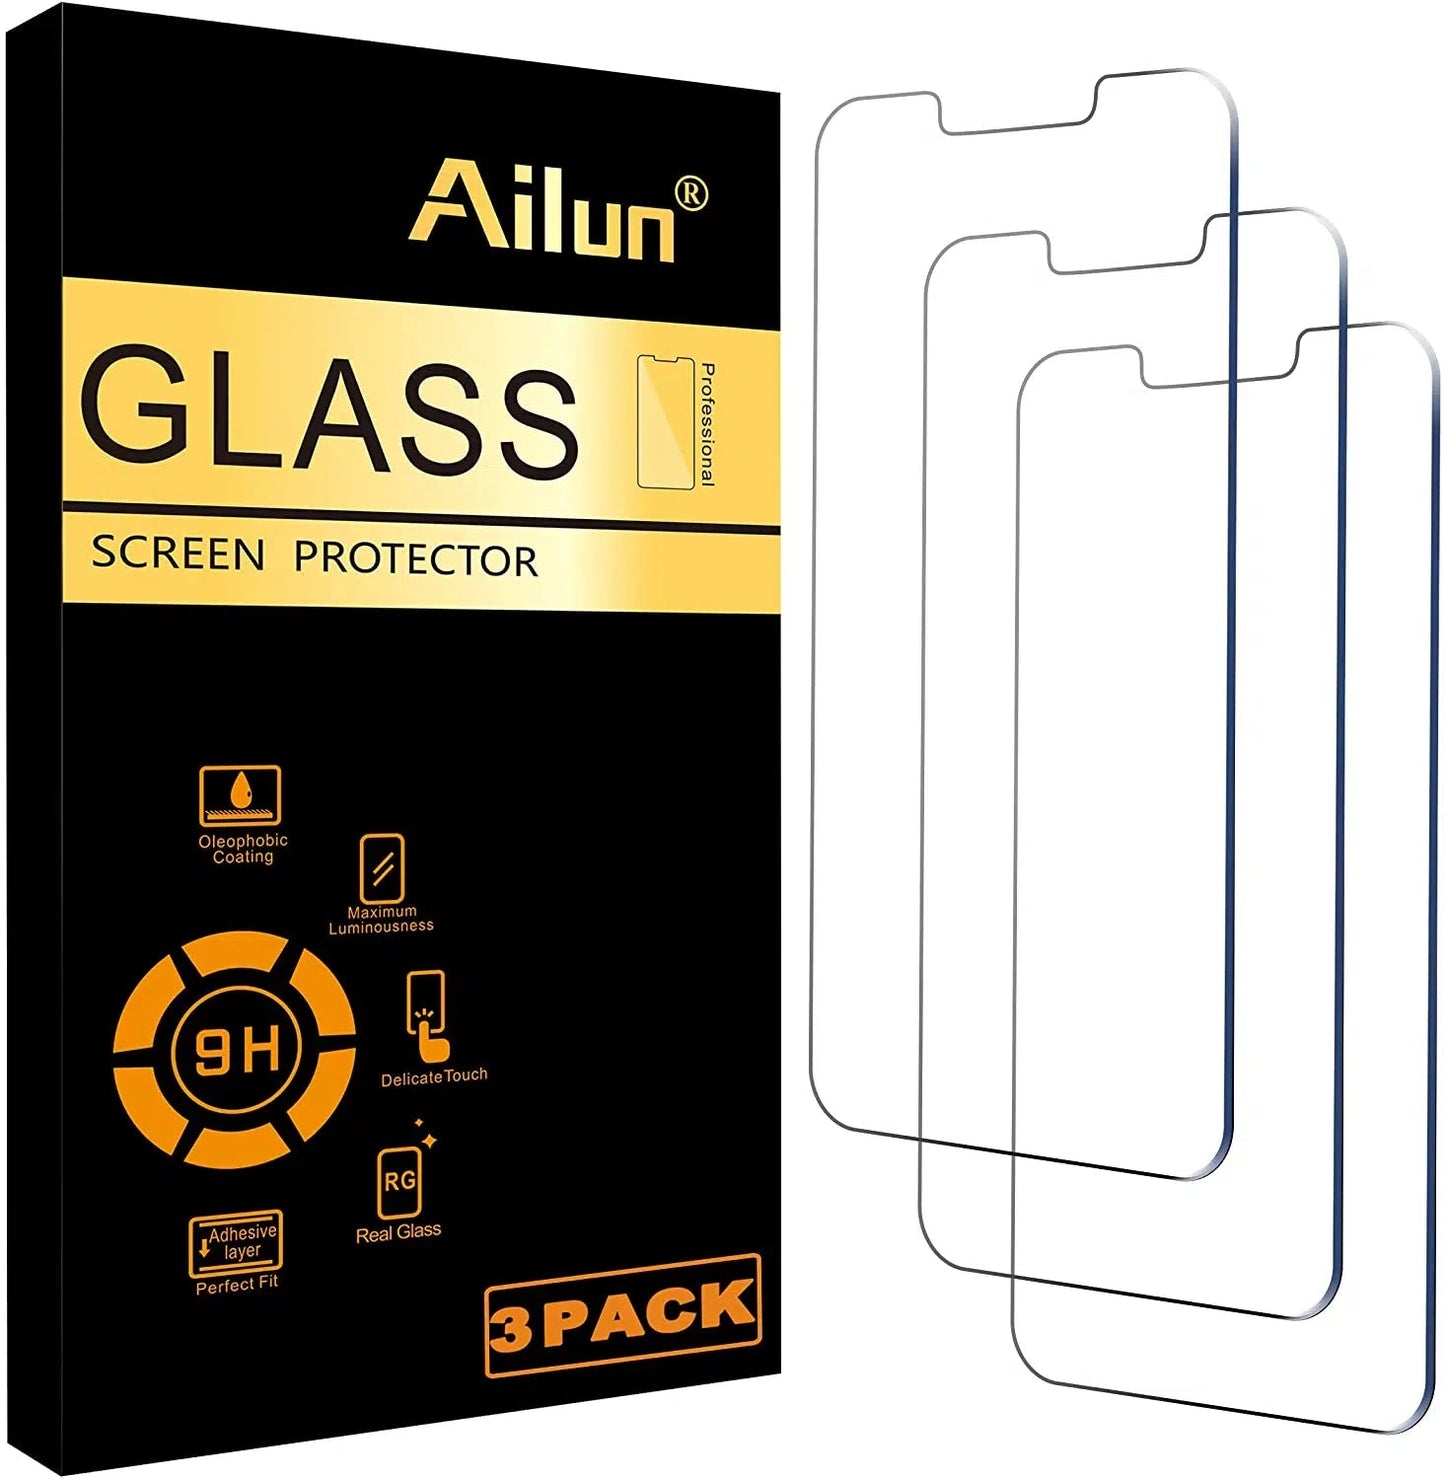 Glass Screen Protector Compatible for iPhone XS Max & iPhone 11 Pro Max 3 Pack